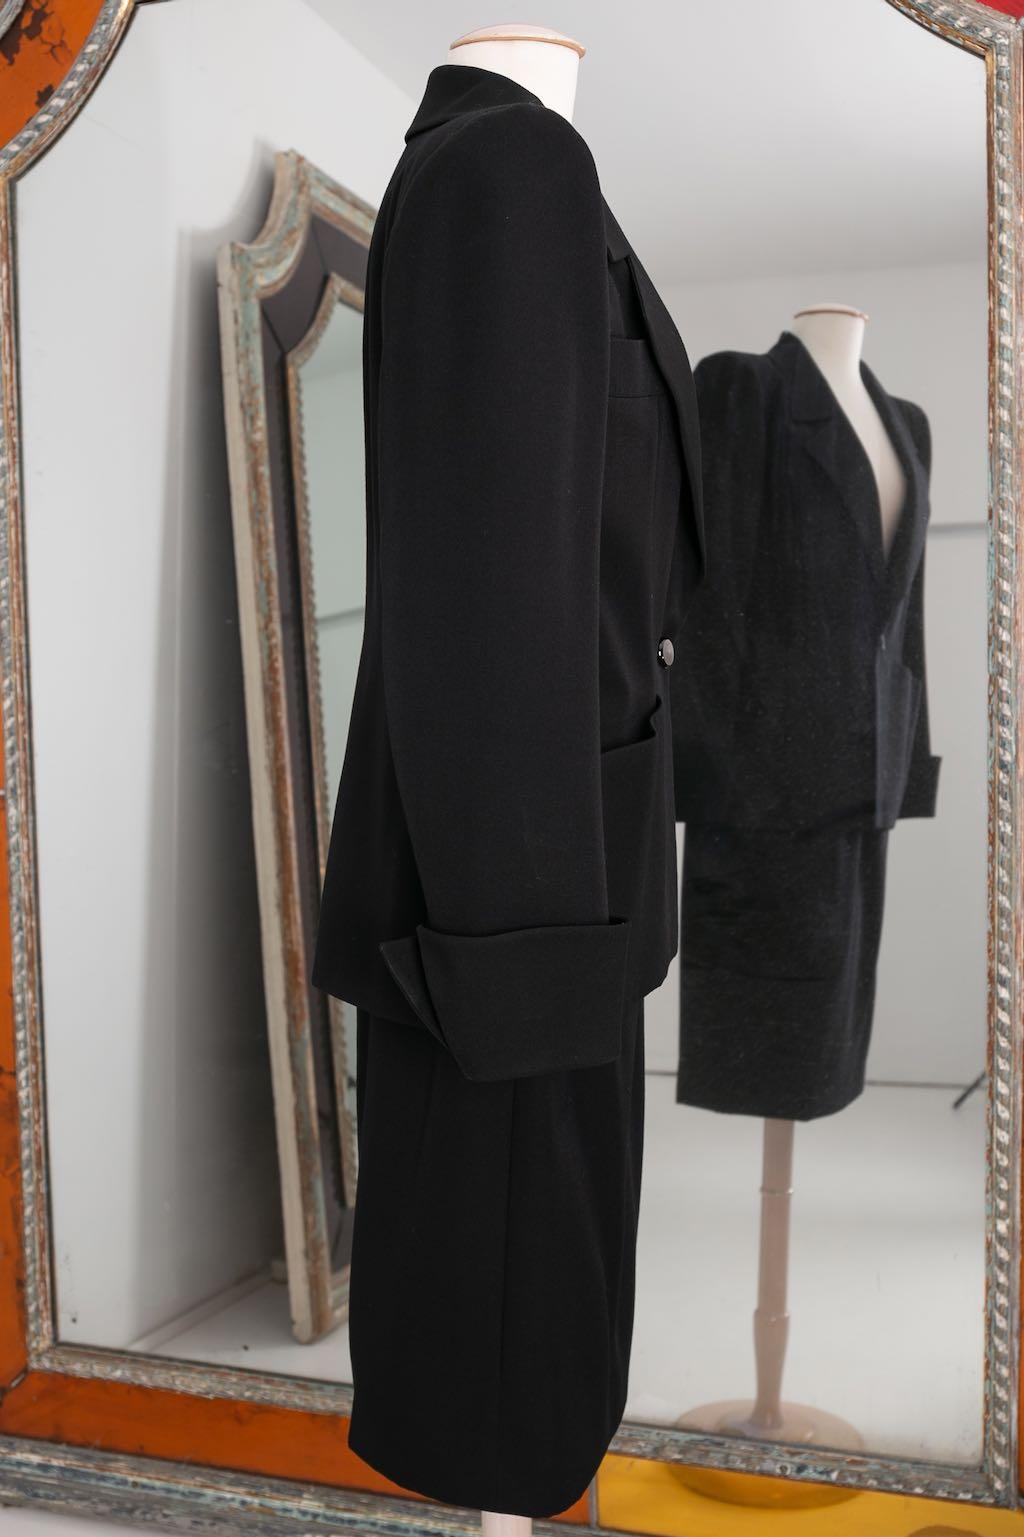 Yves Saint Laurent Haute Couture Black Skirt and Jacket Set, circa 1981/1982 For Sale 15